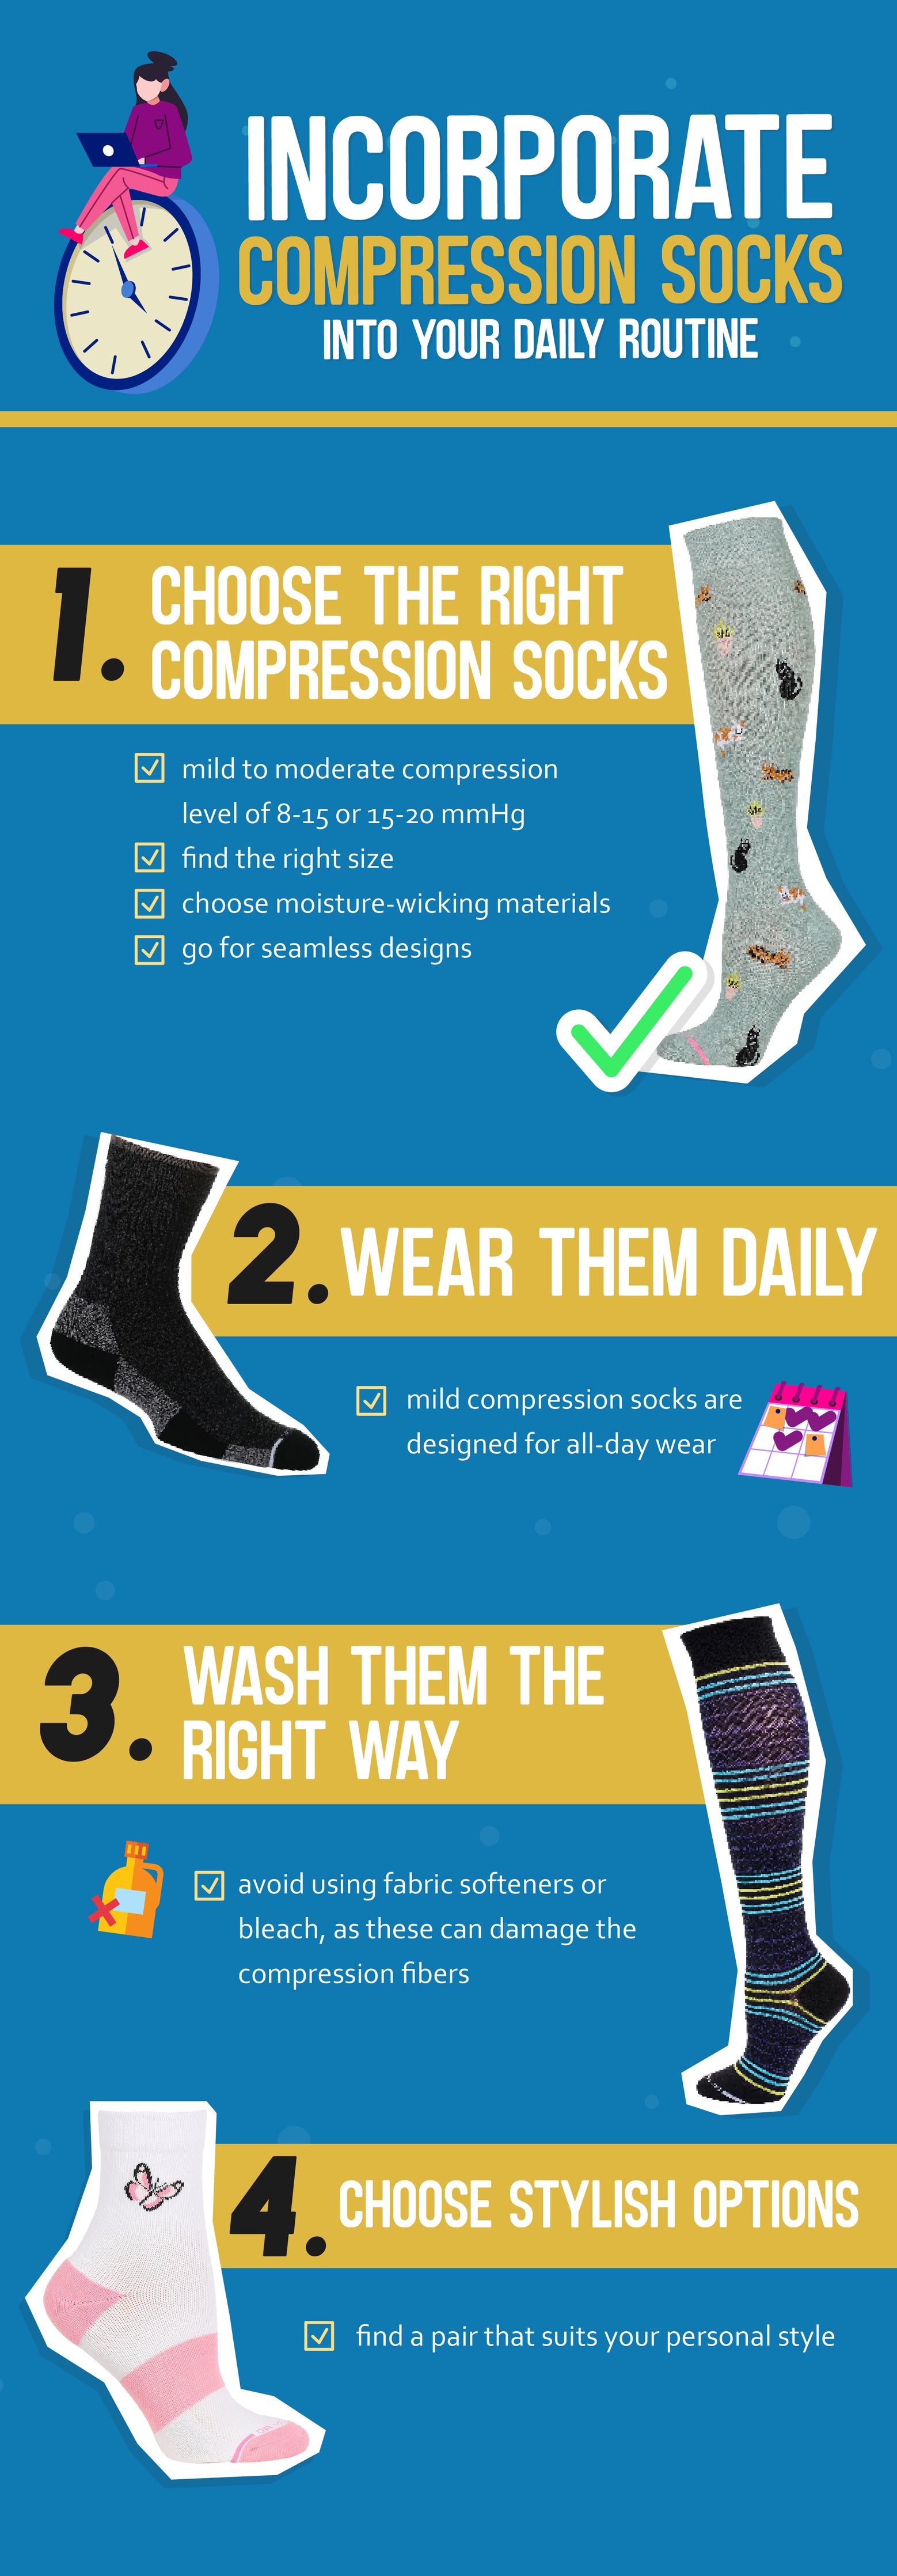 Incorporating Compression Socks Into Your Daily Routine | Blog Posts ...